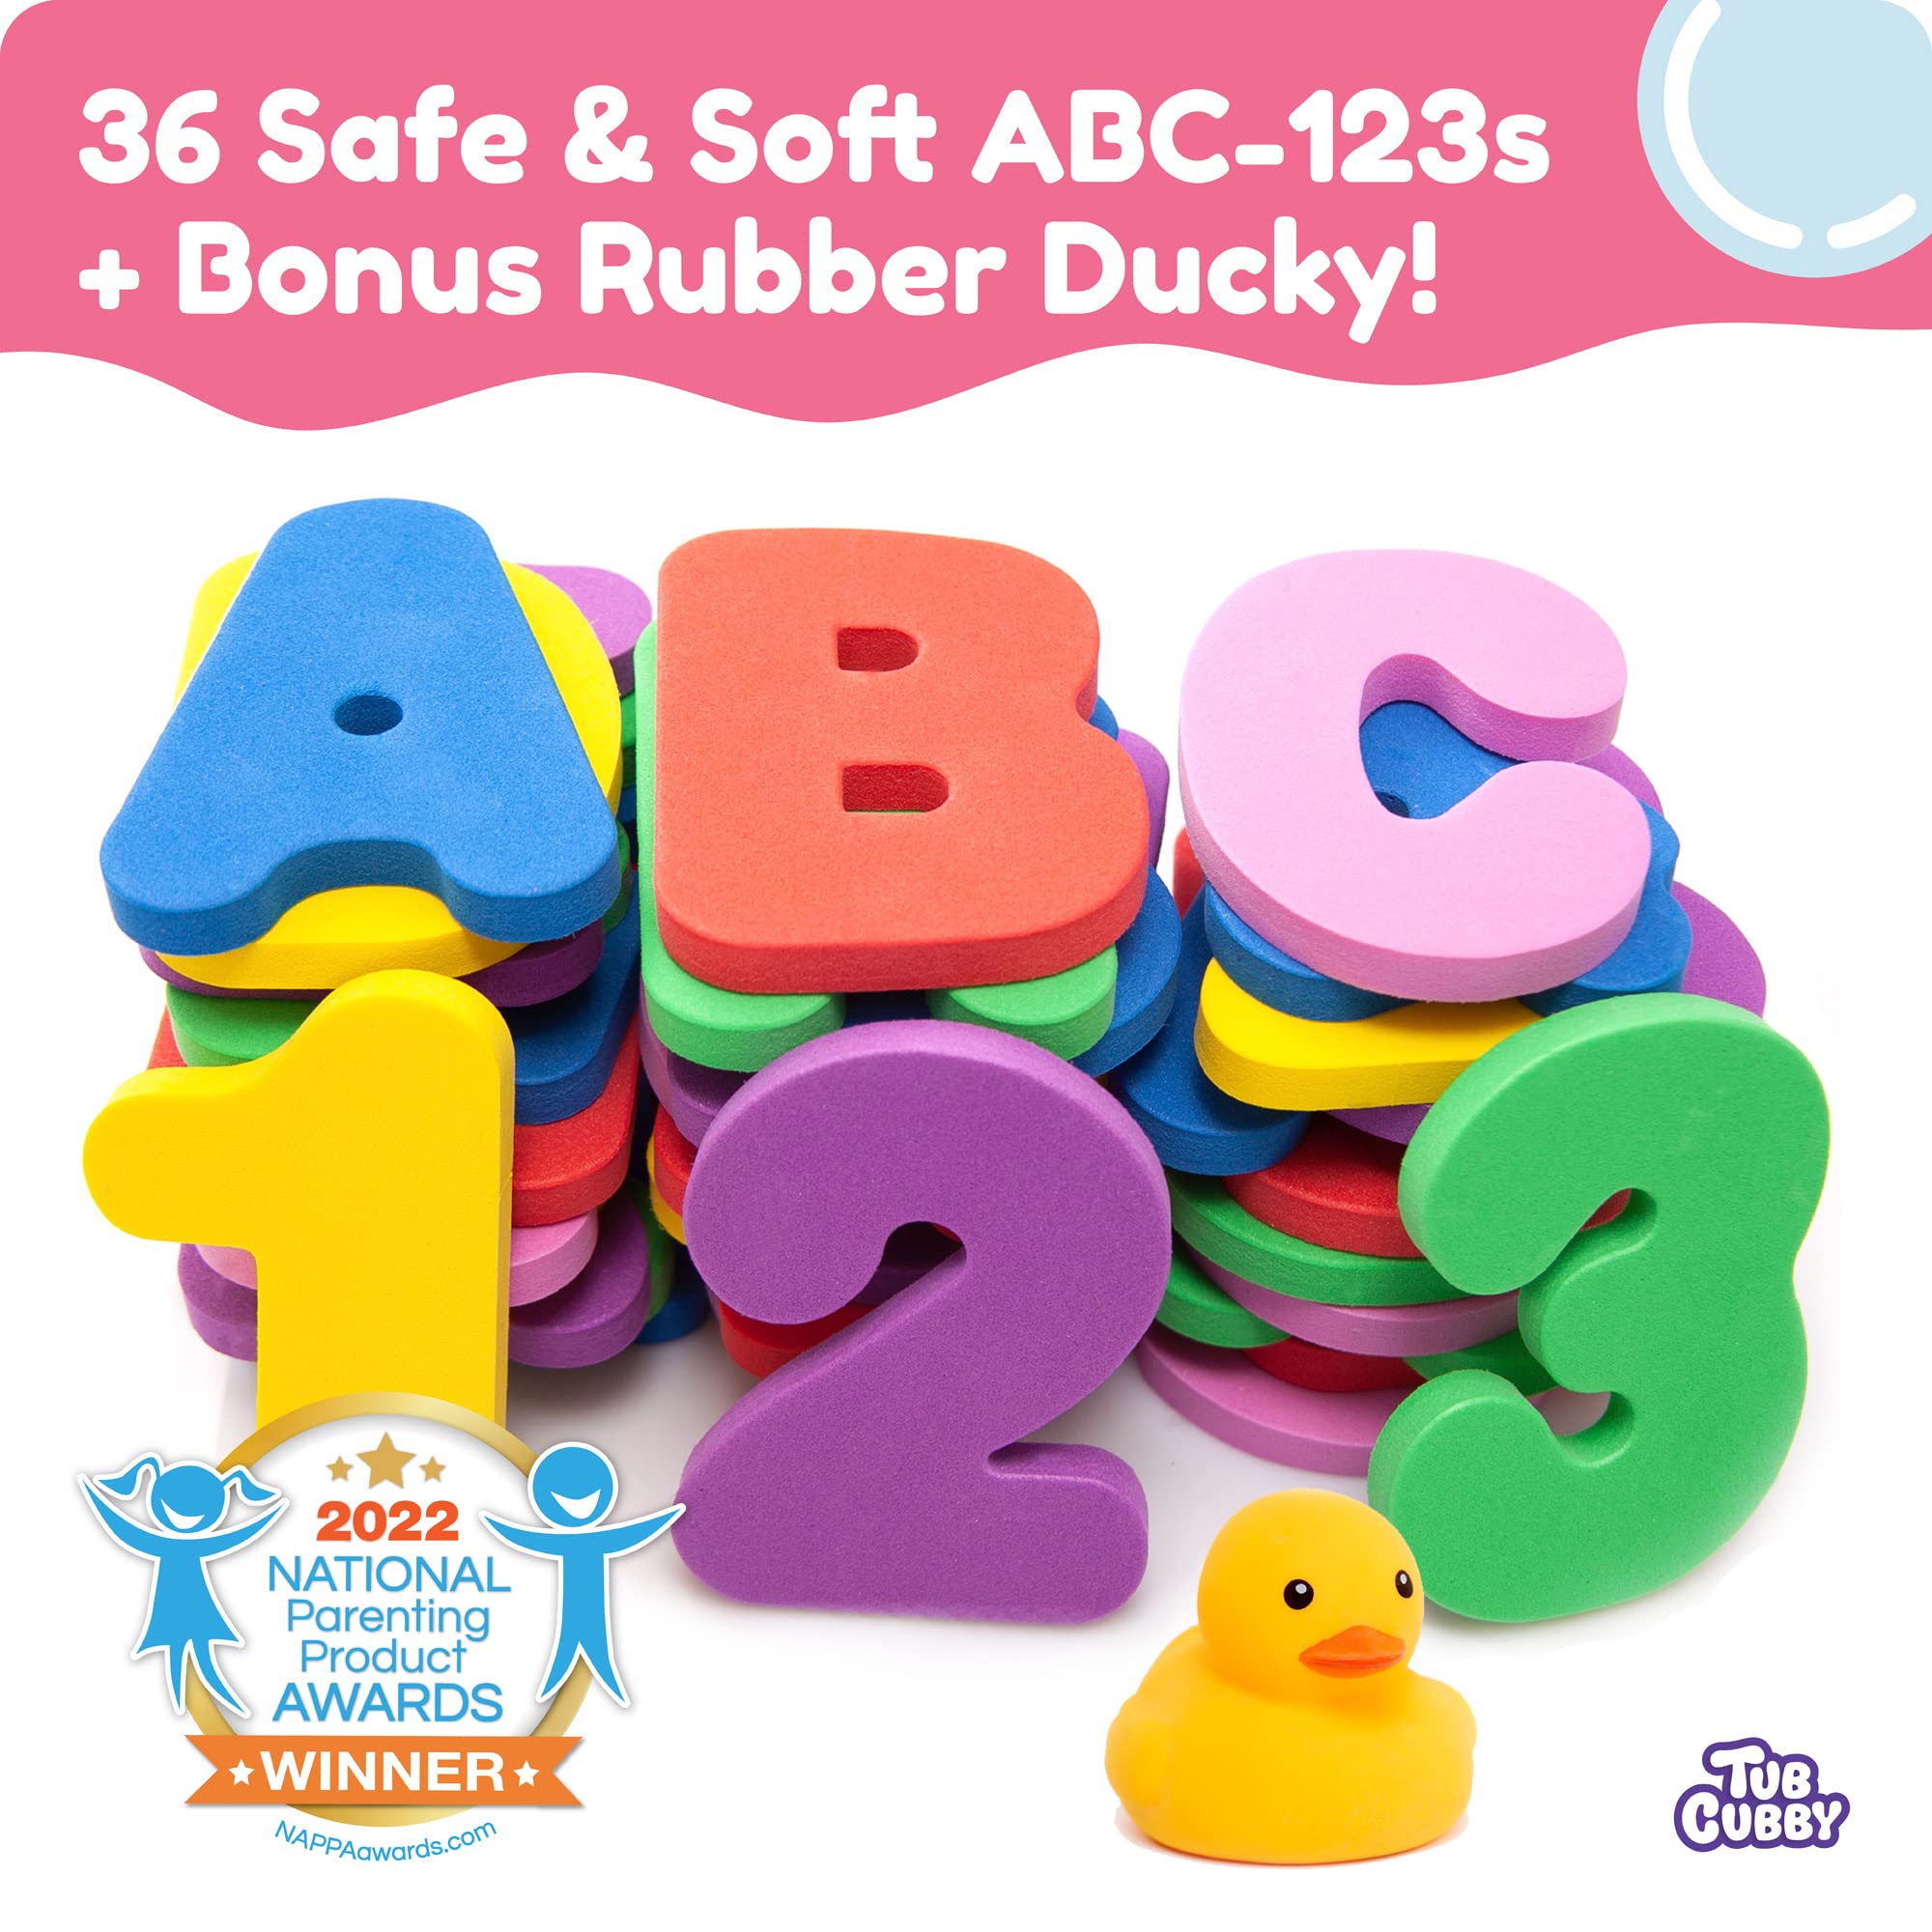 Tub Cubby Original Bath Toy Storage for Baby Toys with Suction & Adhesive Hooks, 14x20 Mesh Net Shower Caddy for Bathtub Toys, 36 ABC Soft Foam Letters & Numbers - Bonus Rubber Duck & Hooks